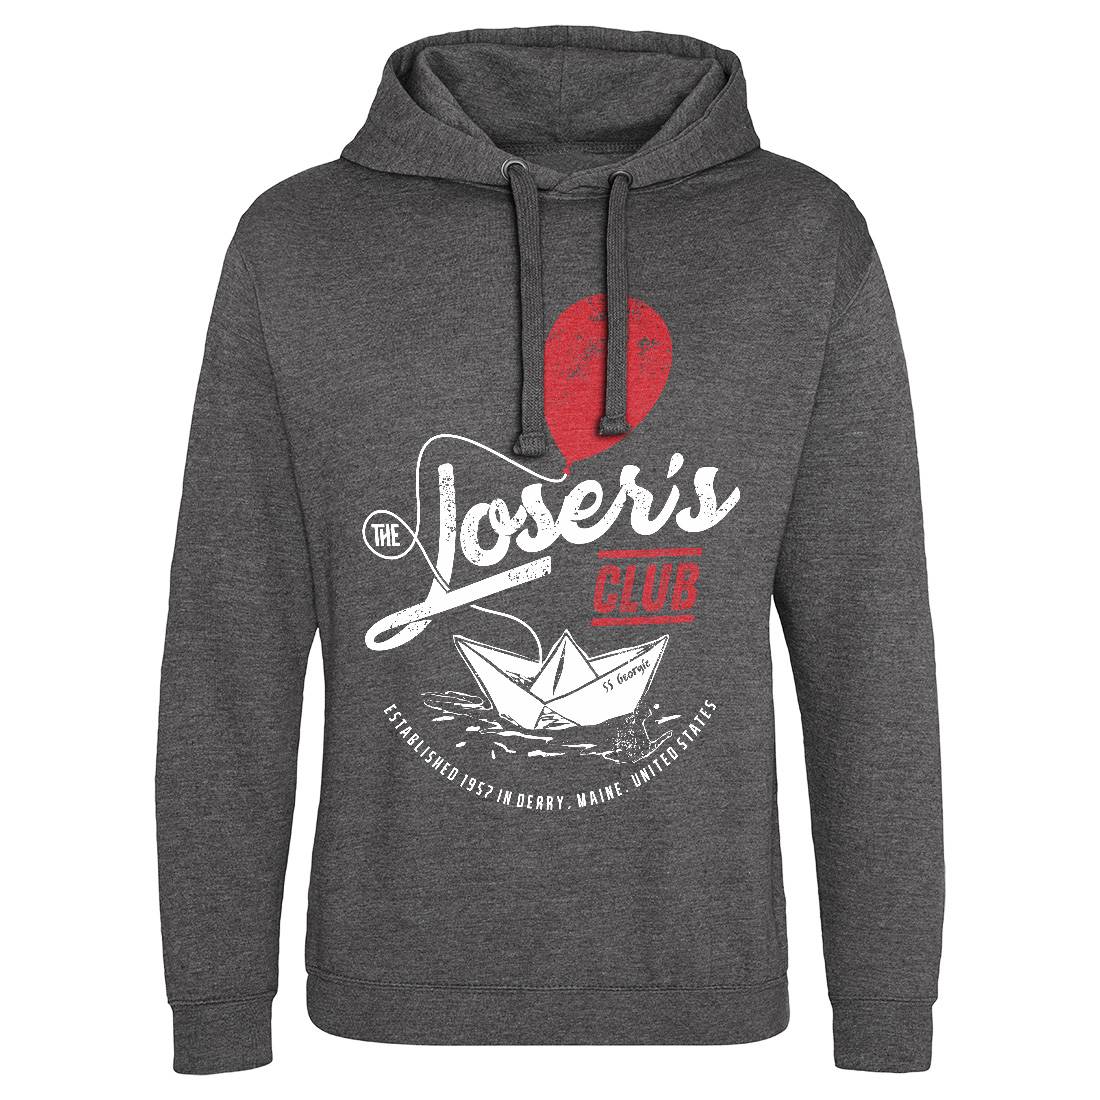 Losers Club Mens Hoodie Without Pocket Horror D125